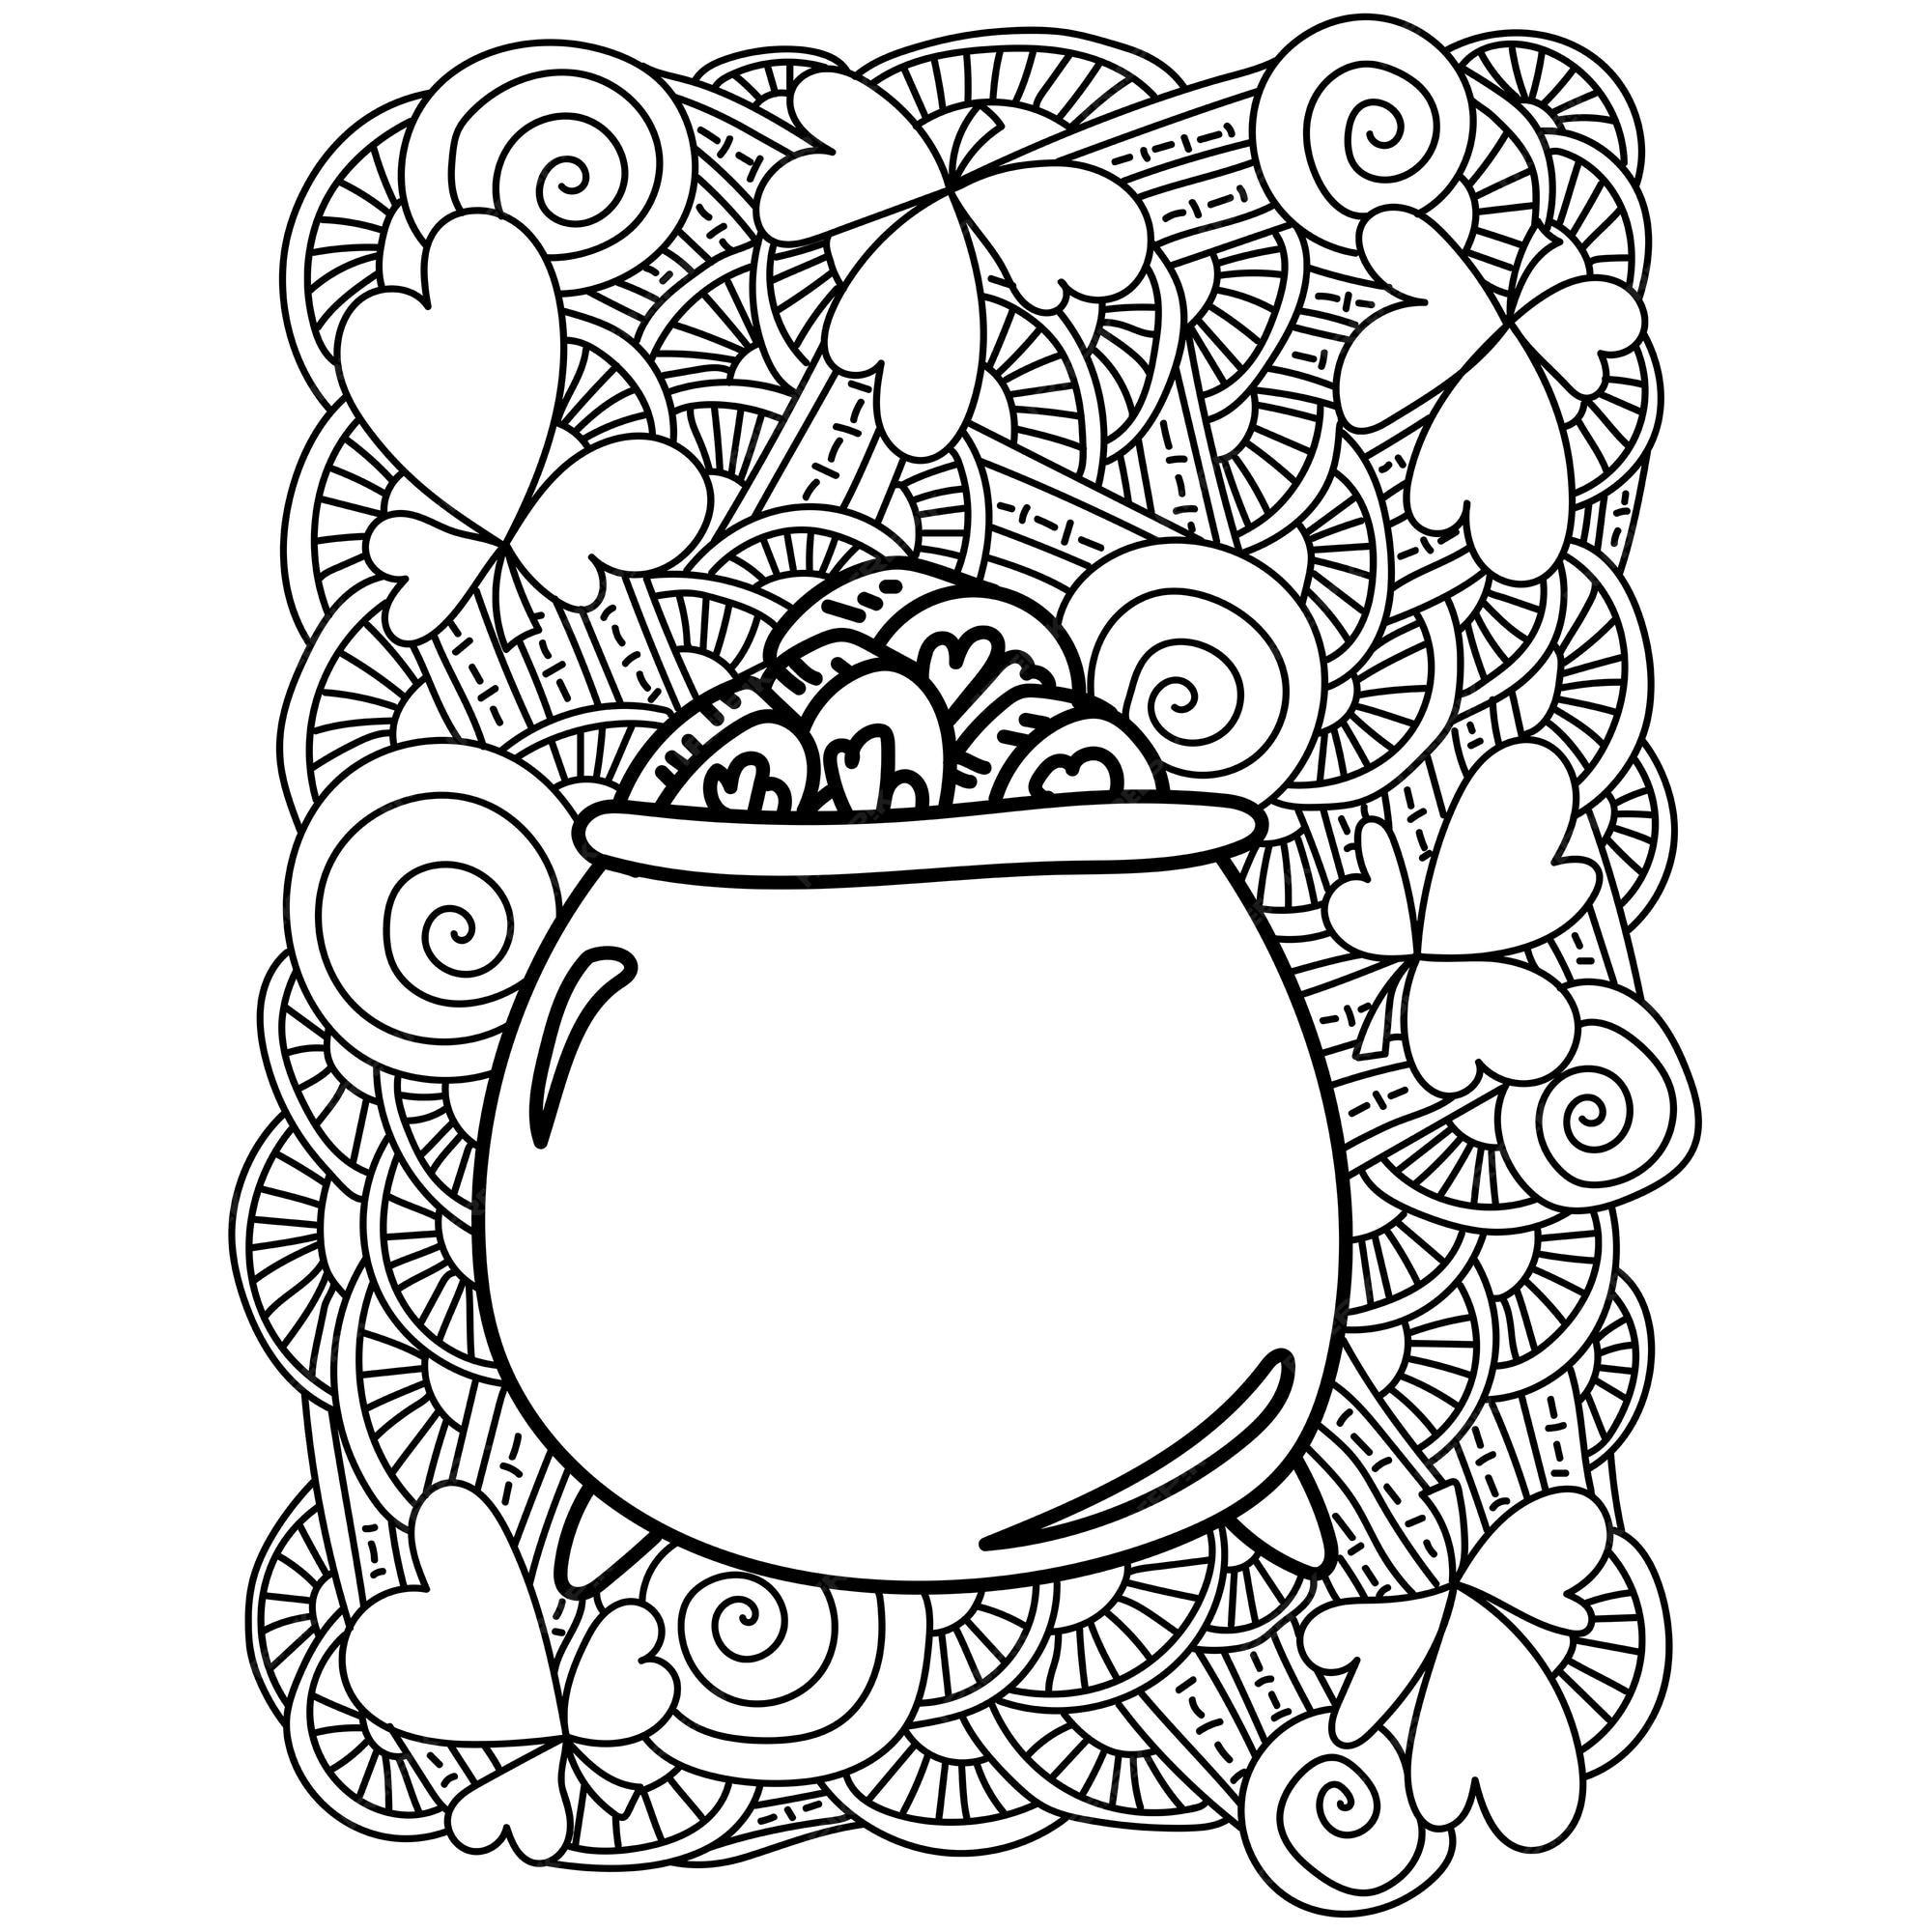 Premium vector ornate st patricks day coloring page pot of coins among clover and fantasy patterns